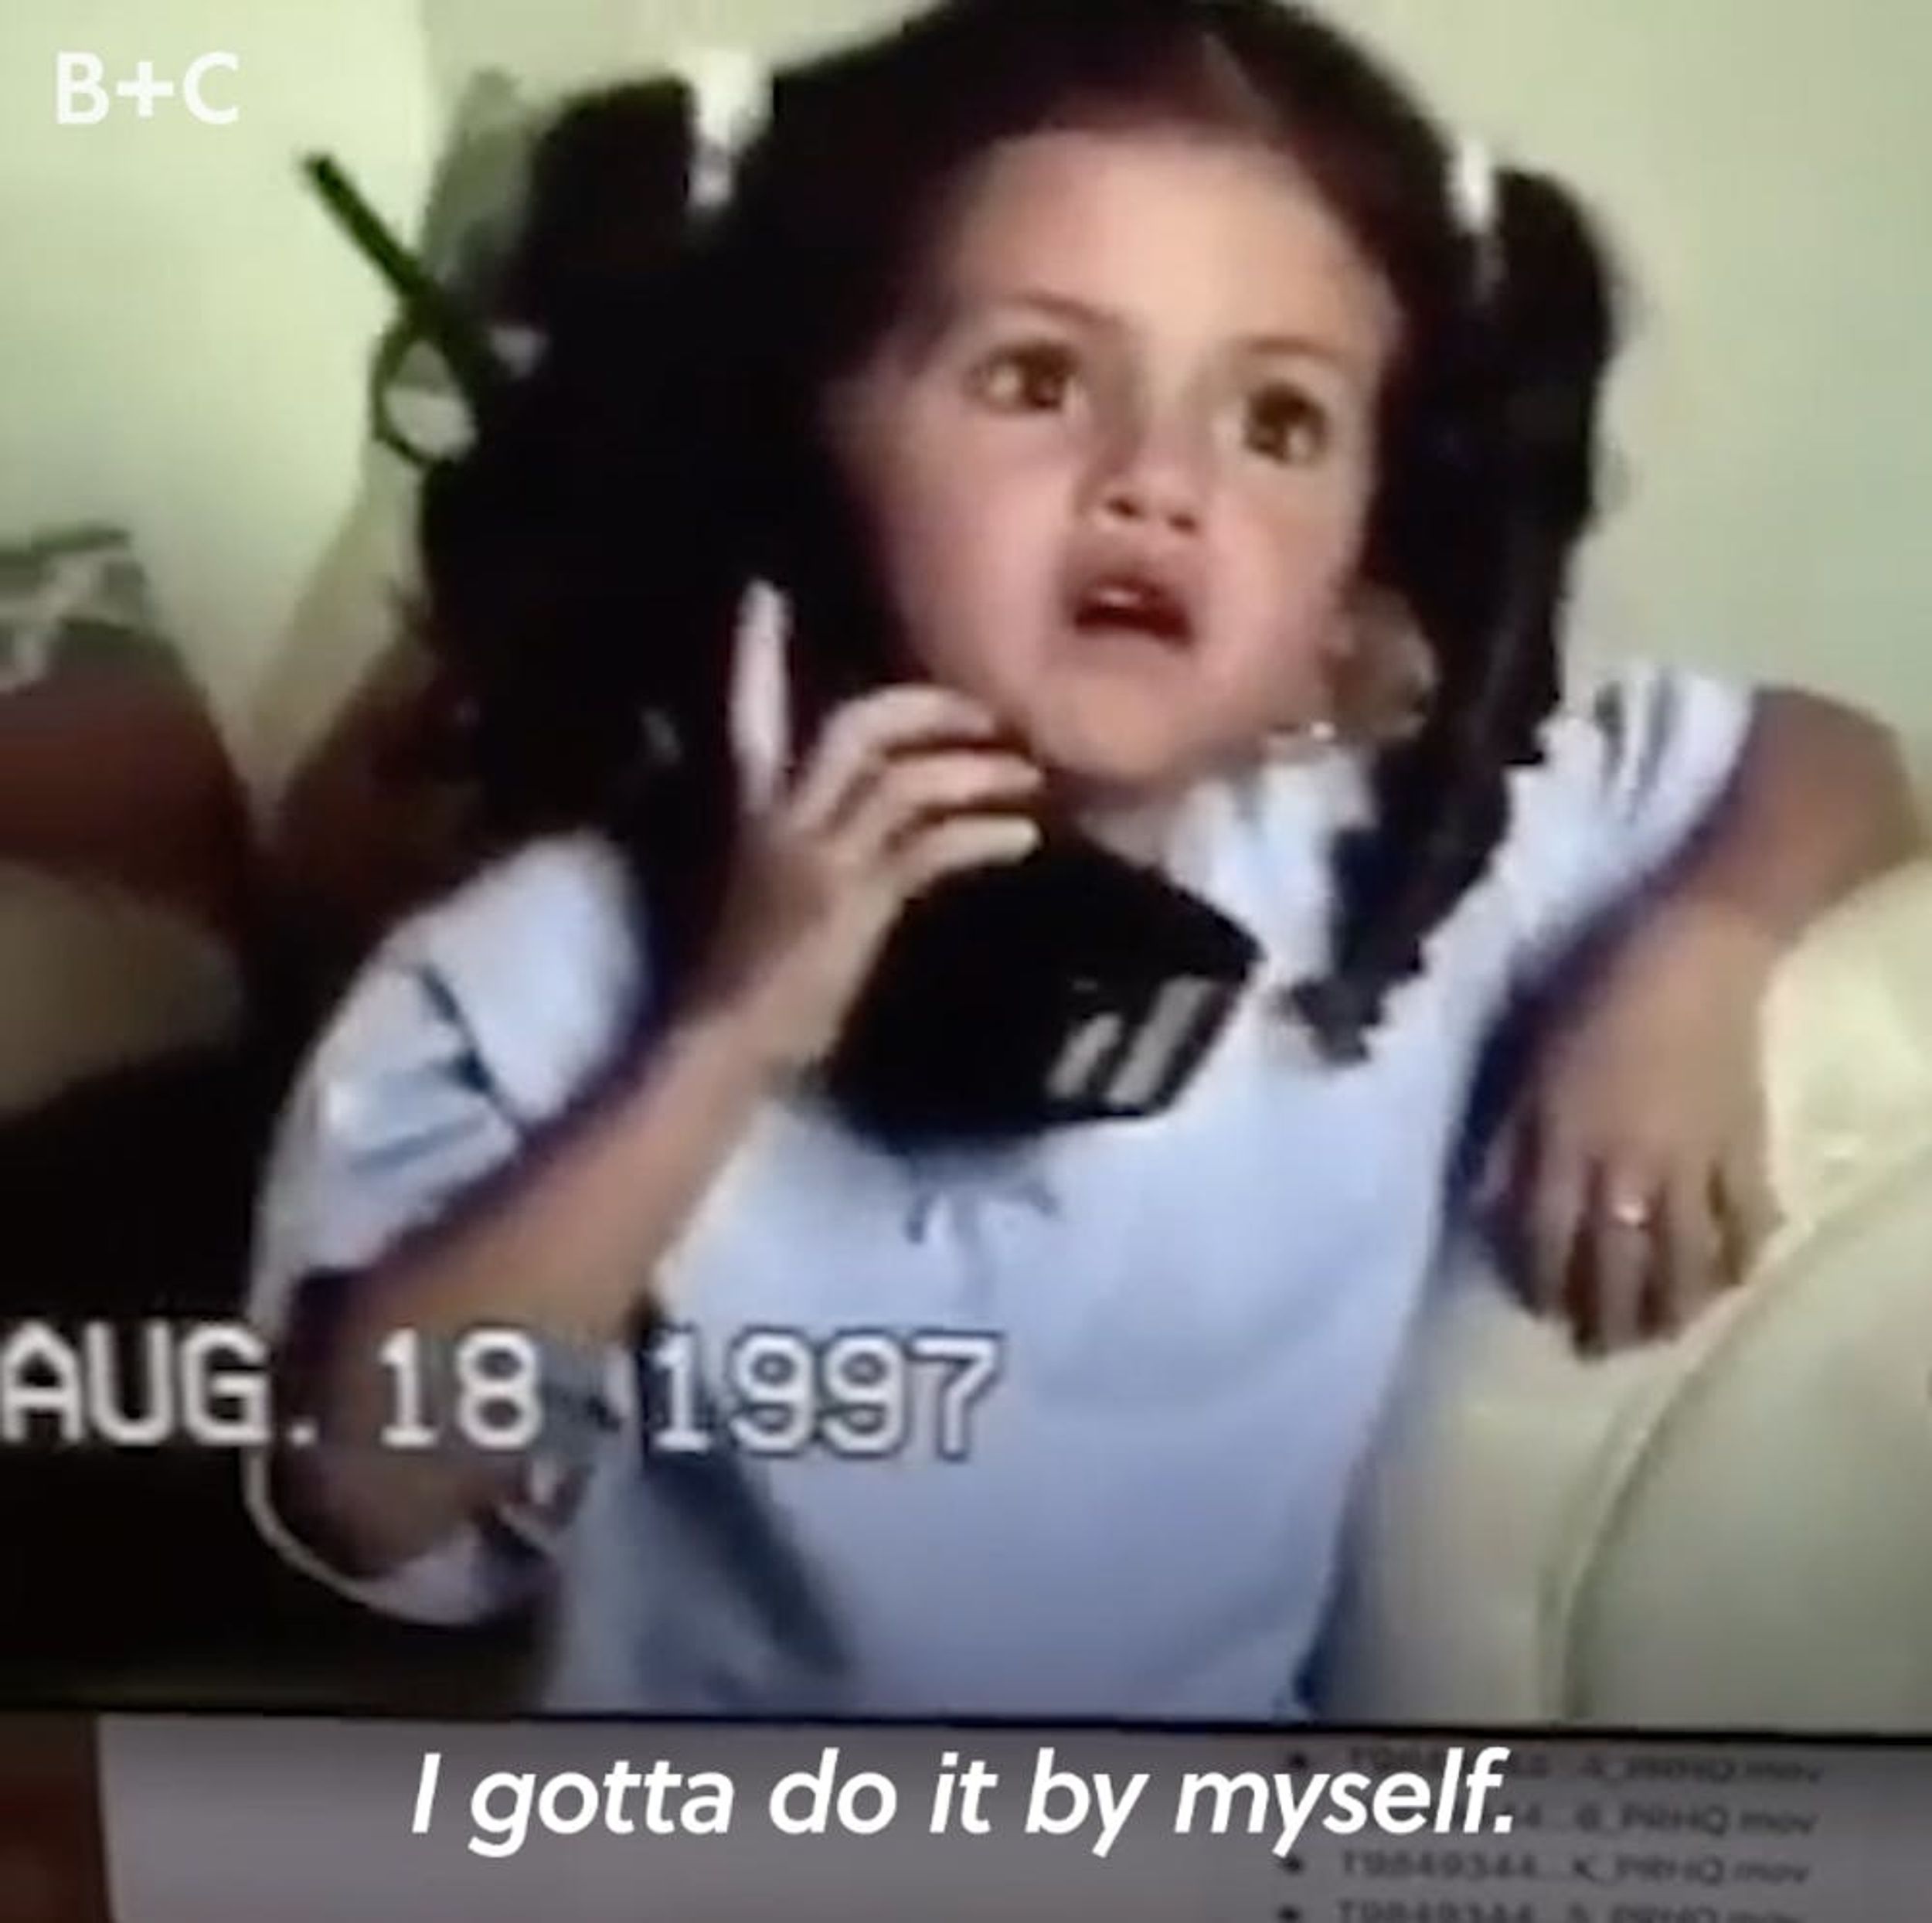 These Celebrity Home Videos Are the Cutest Thing Youâ€™ll See All Day